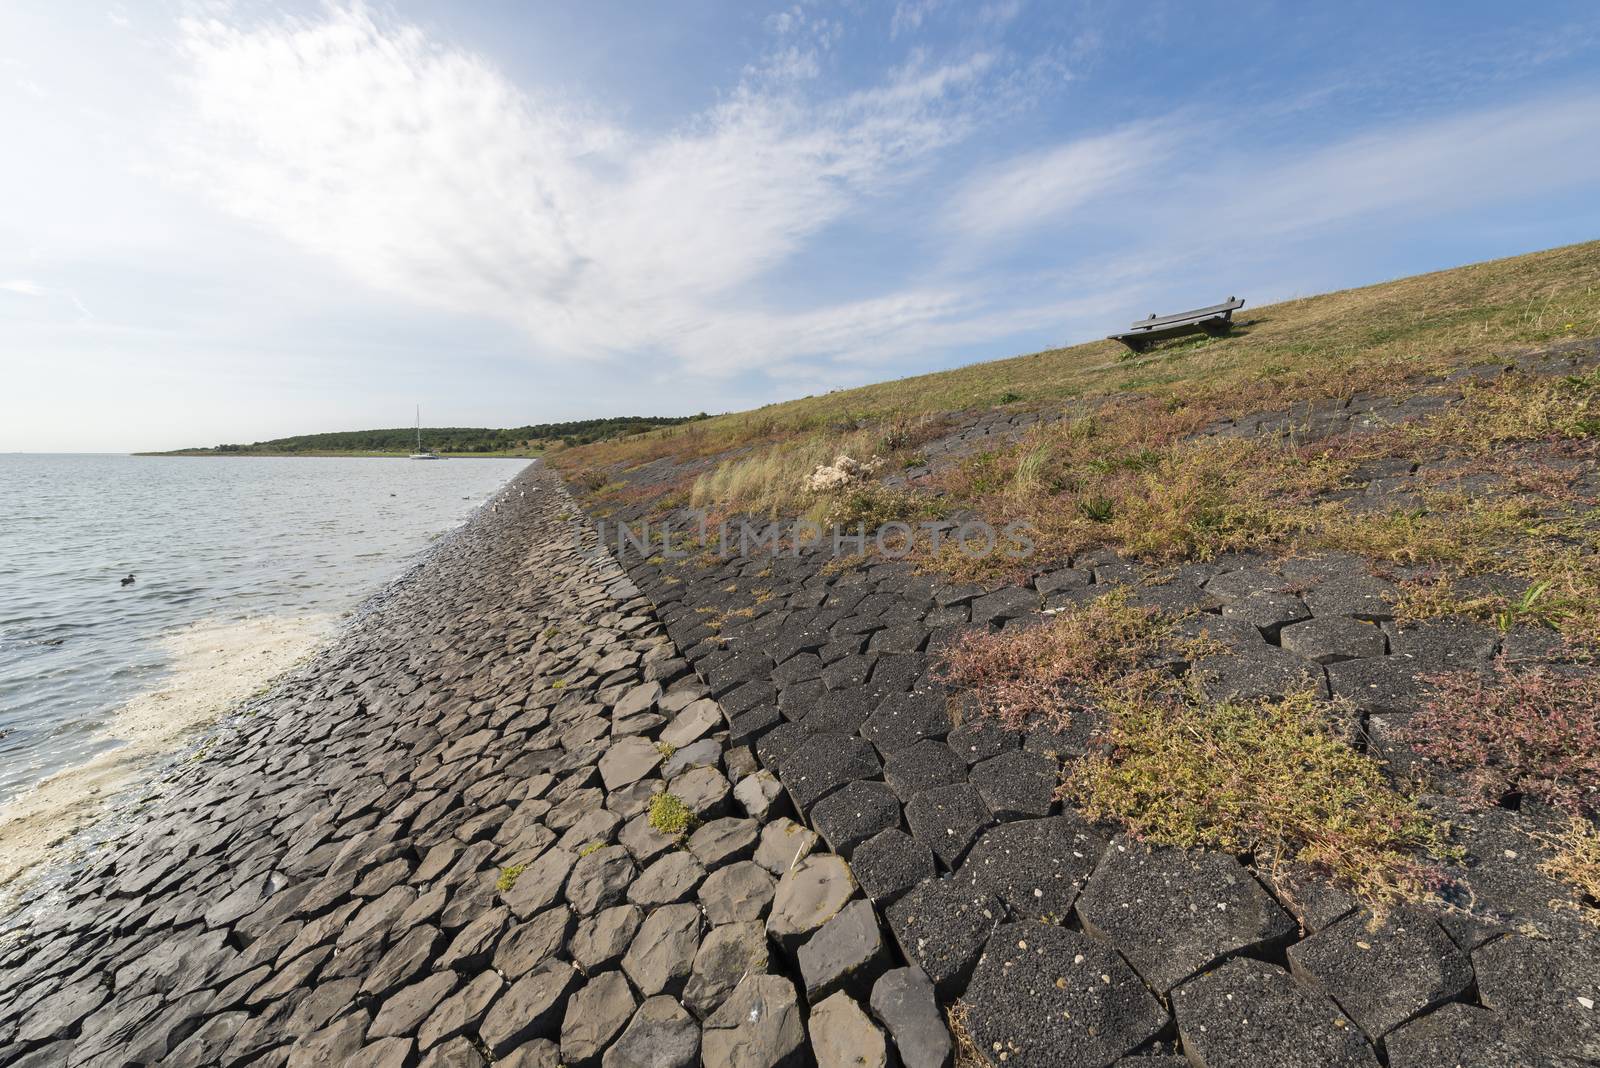 Dike on the island of Vlieland
 by Tofotografie